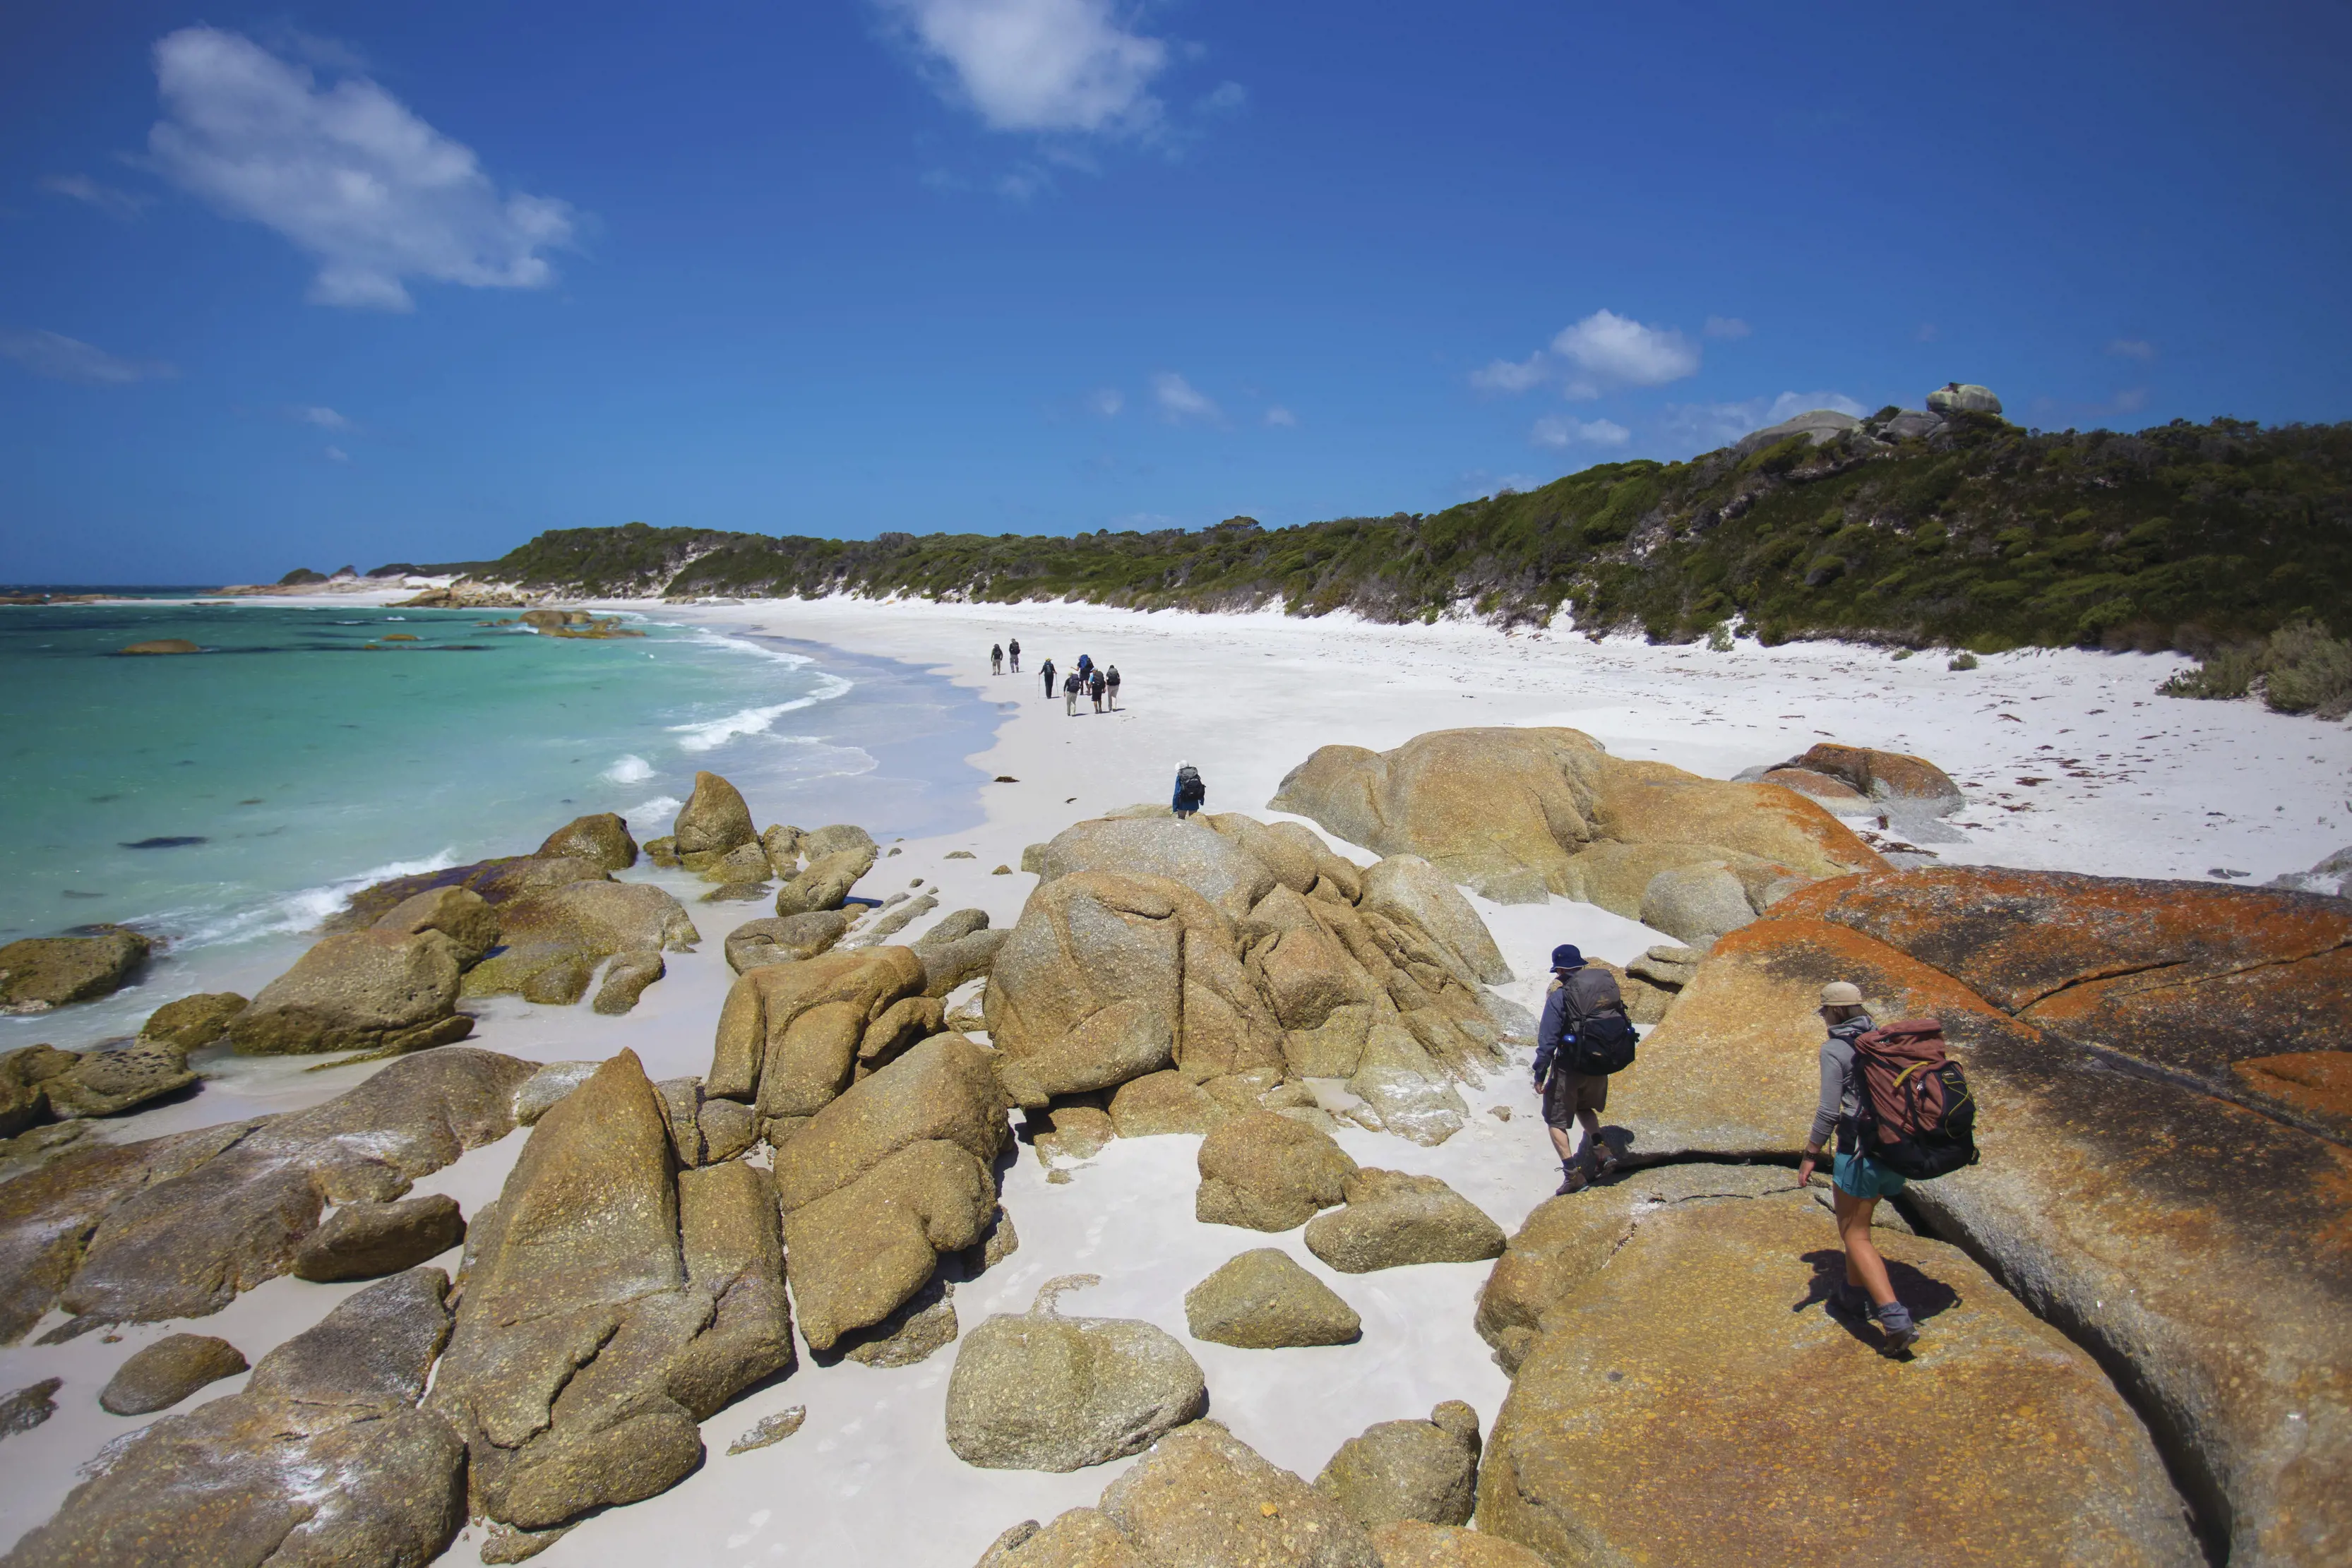 In the foreground, hikers climb down the rocks at Bay of Fires Lodge Walk. In the distance, there are more walkers on the beach.